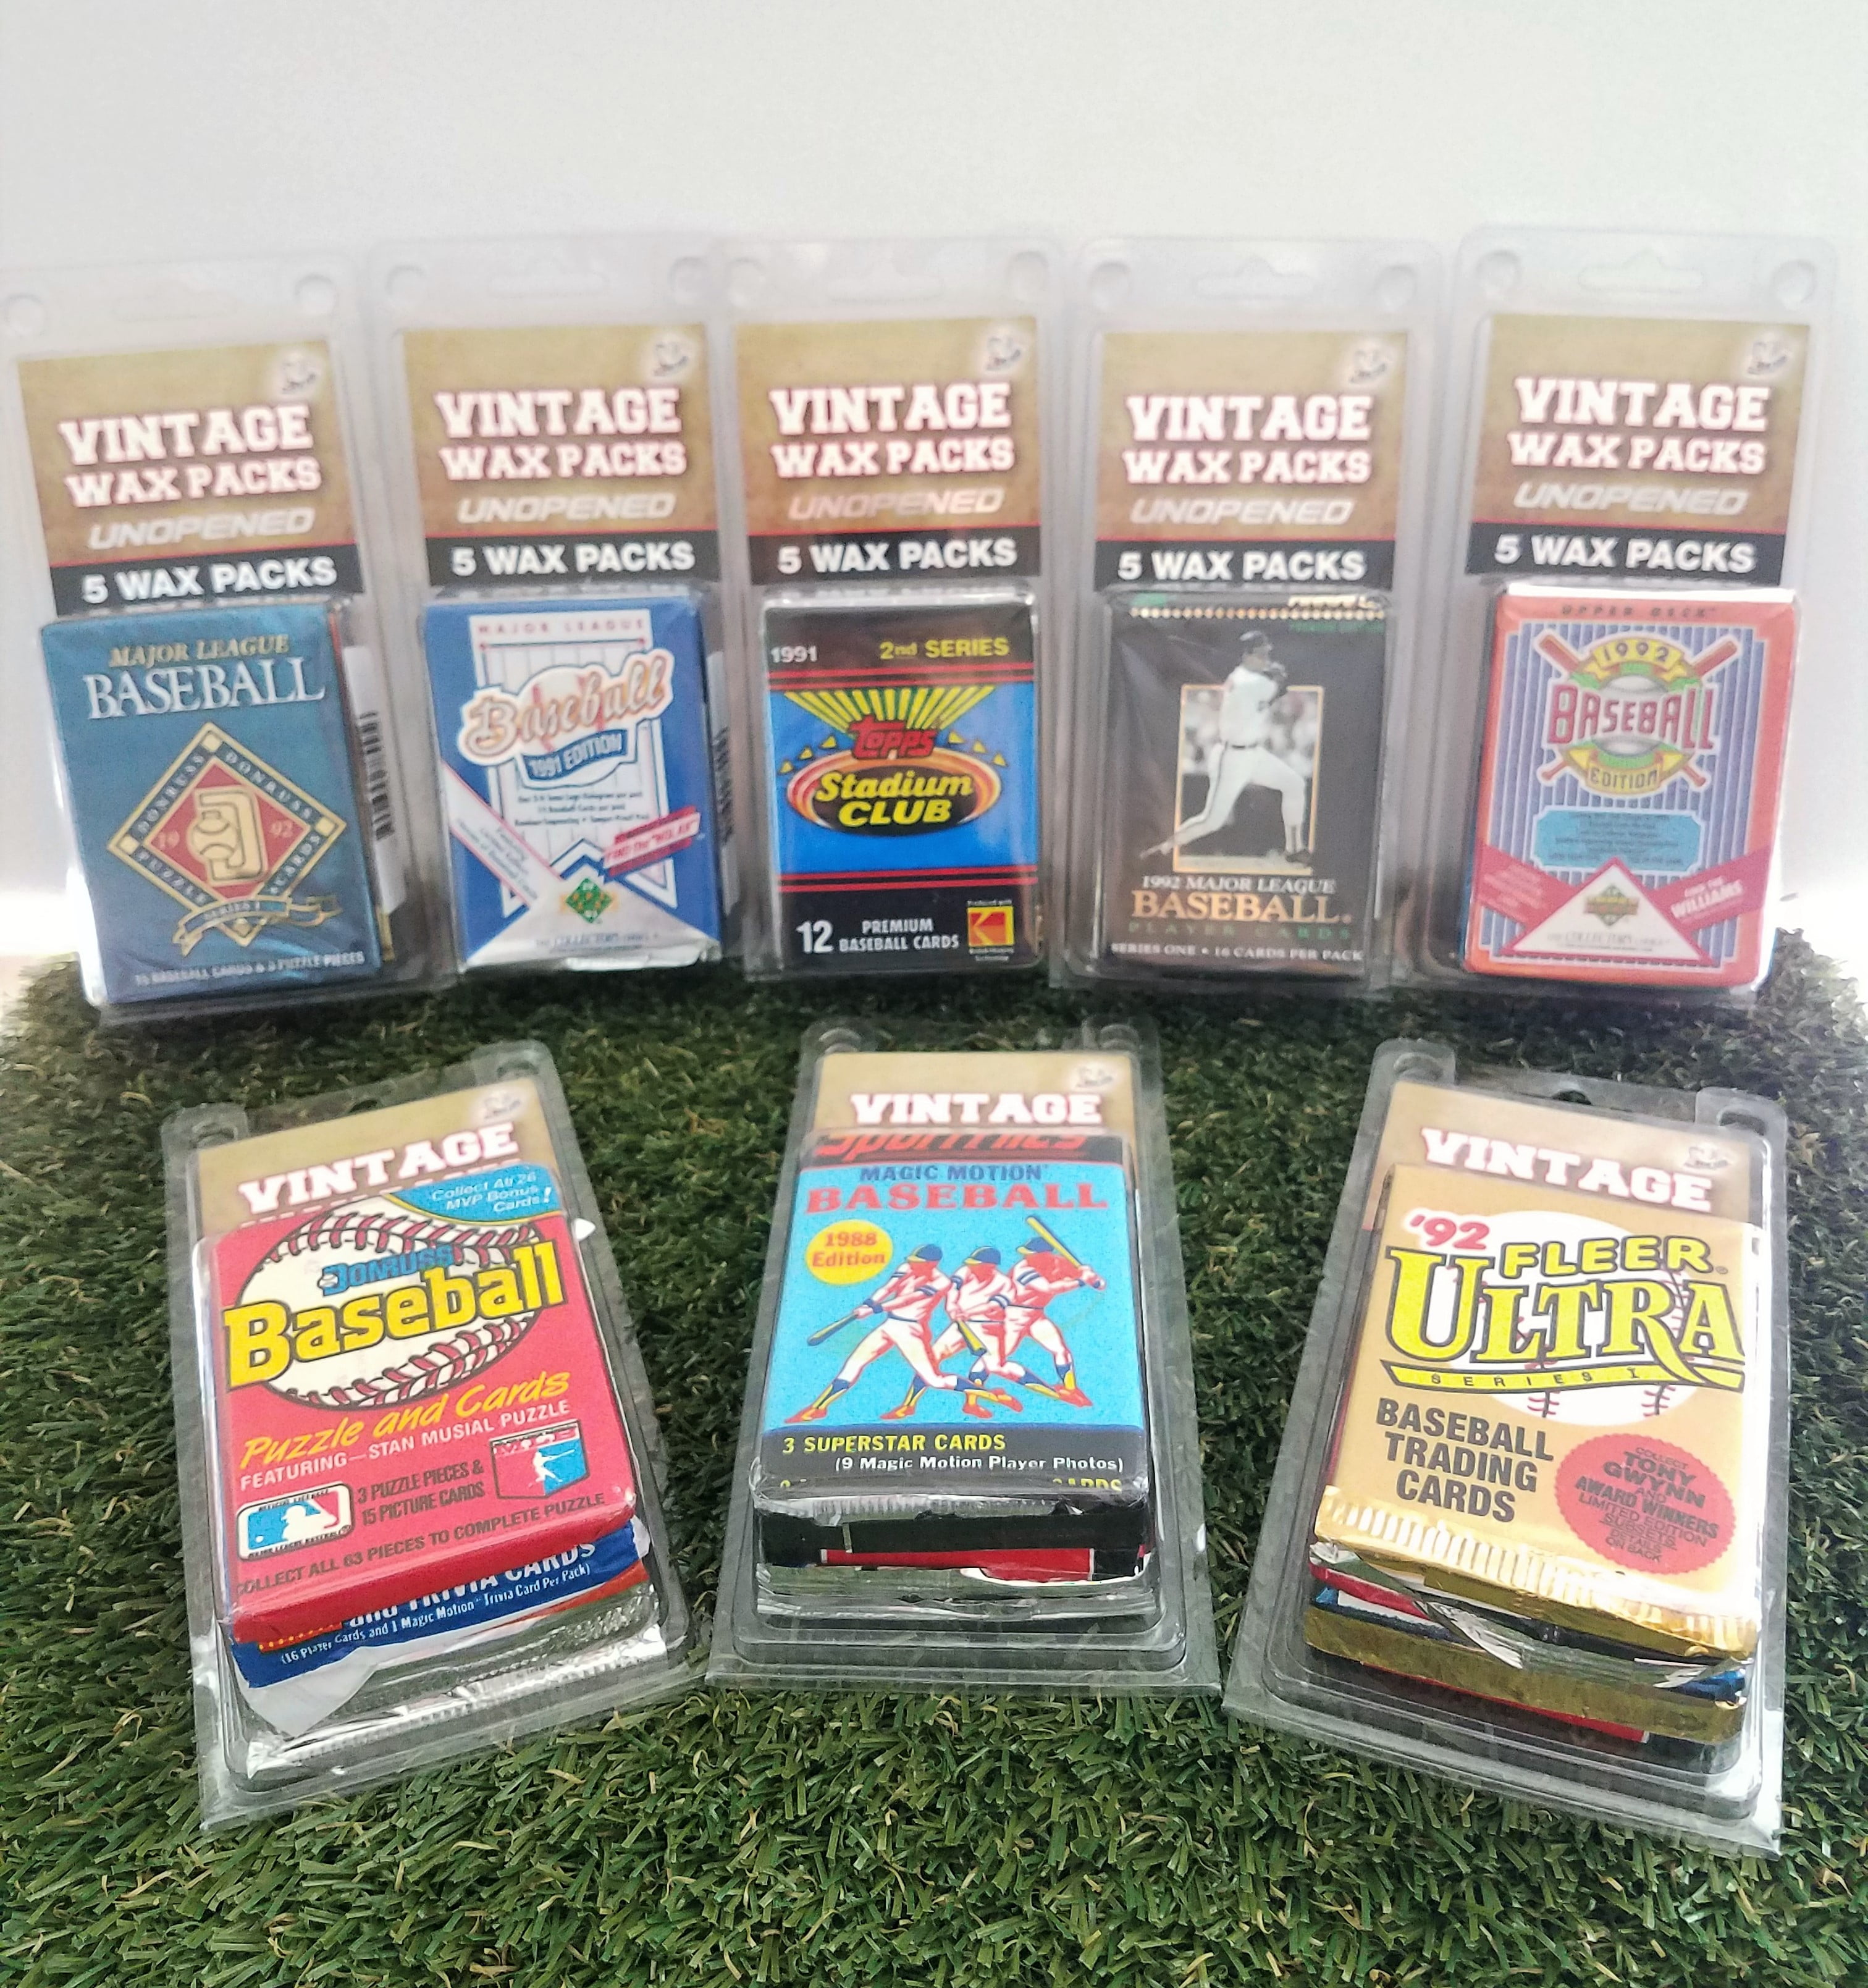 1989 Fleer Baseball Unopened Wax Pack Collectible Trading Cards 15 Cards per Pack Randomly Inserted All Pro Cards 